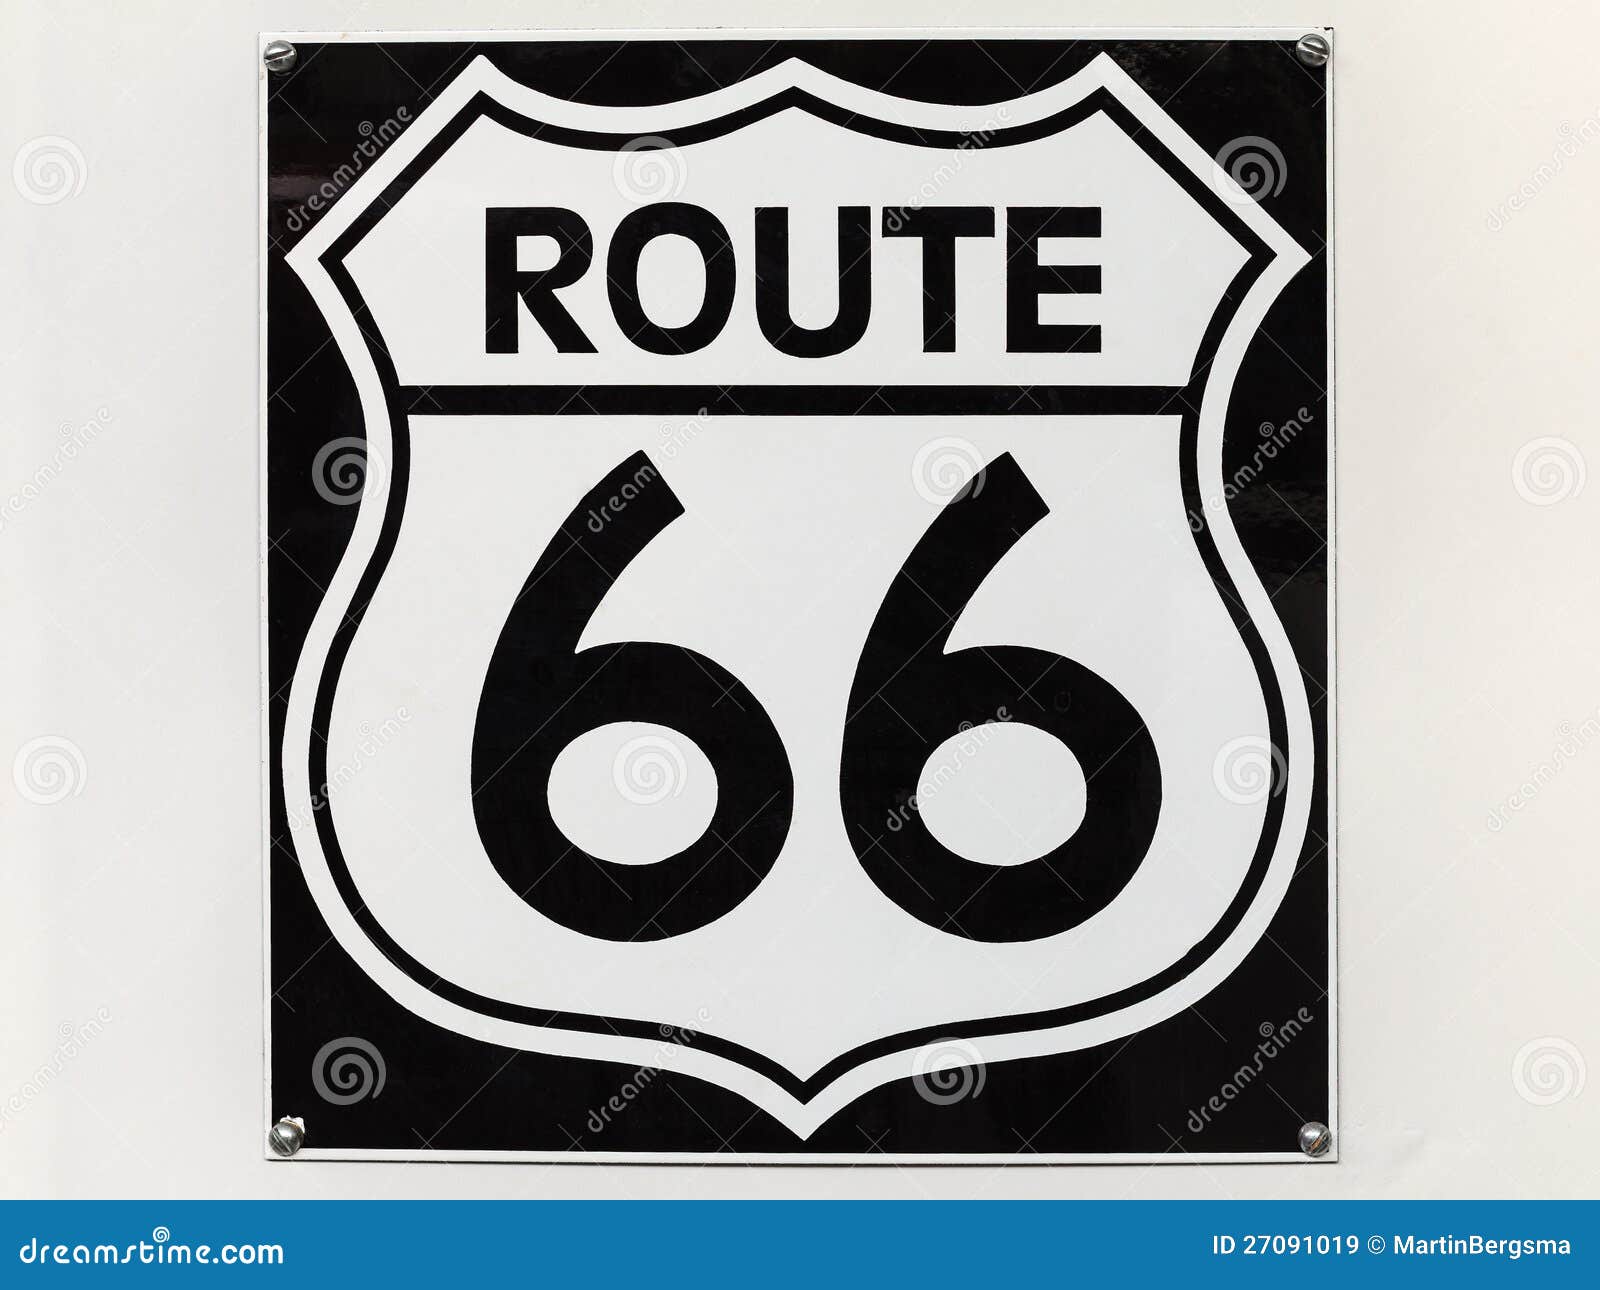 vintage route 66 sign on an off white background